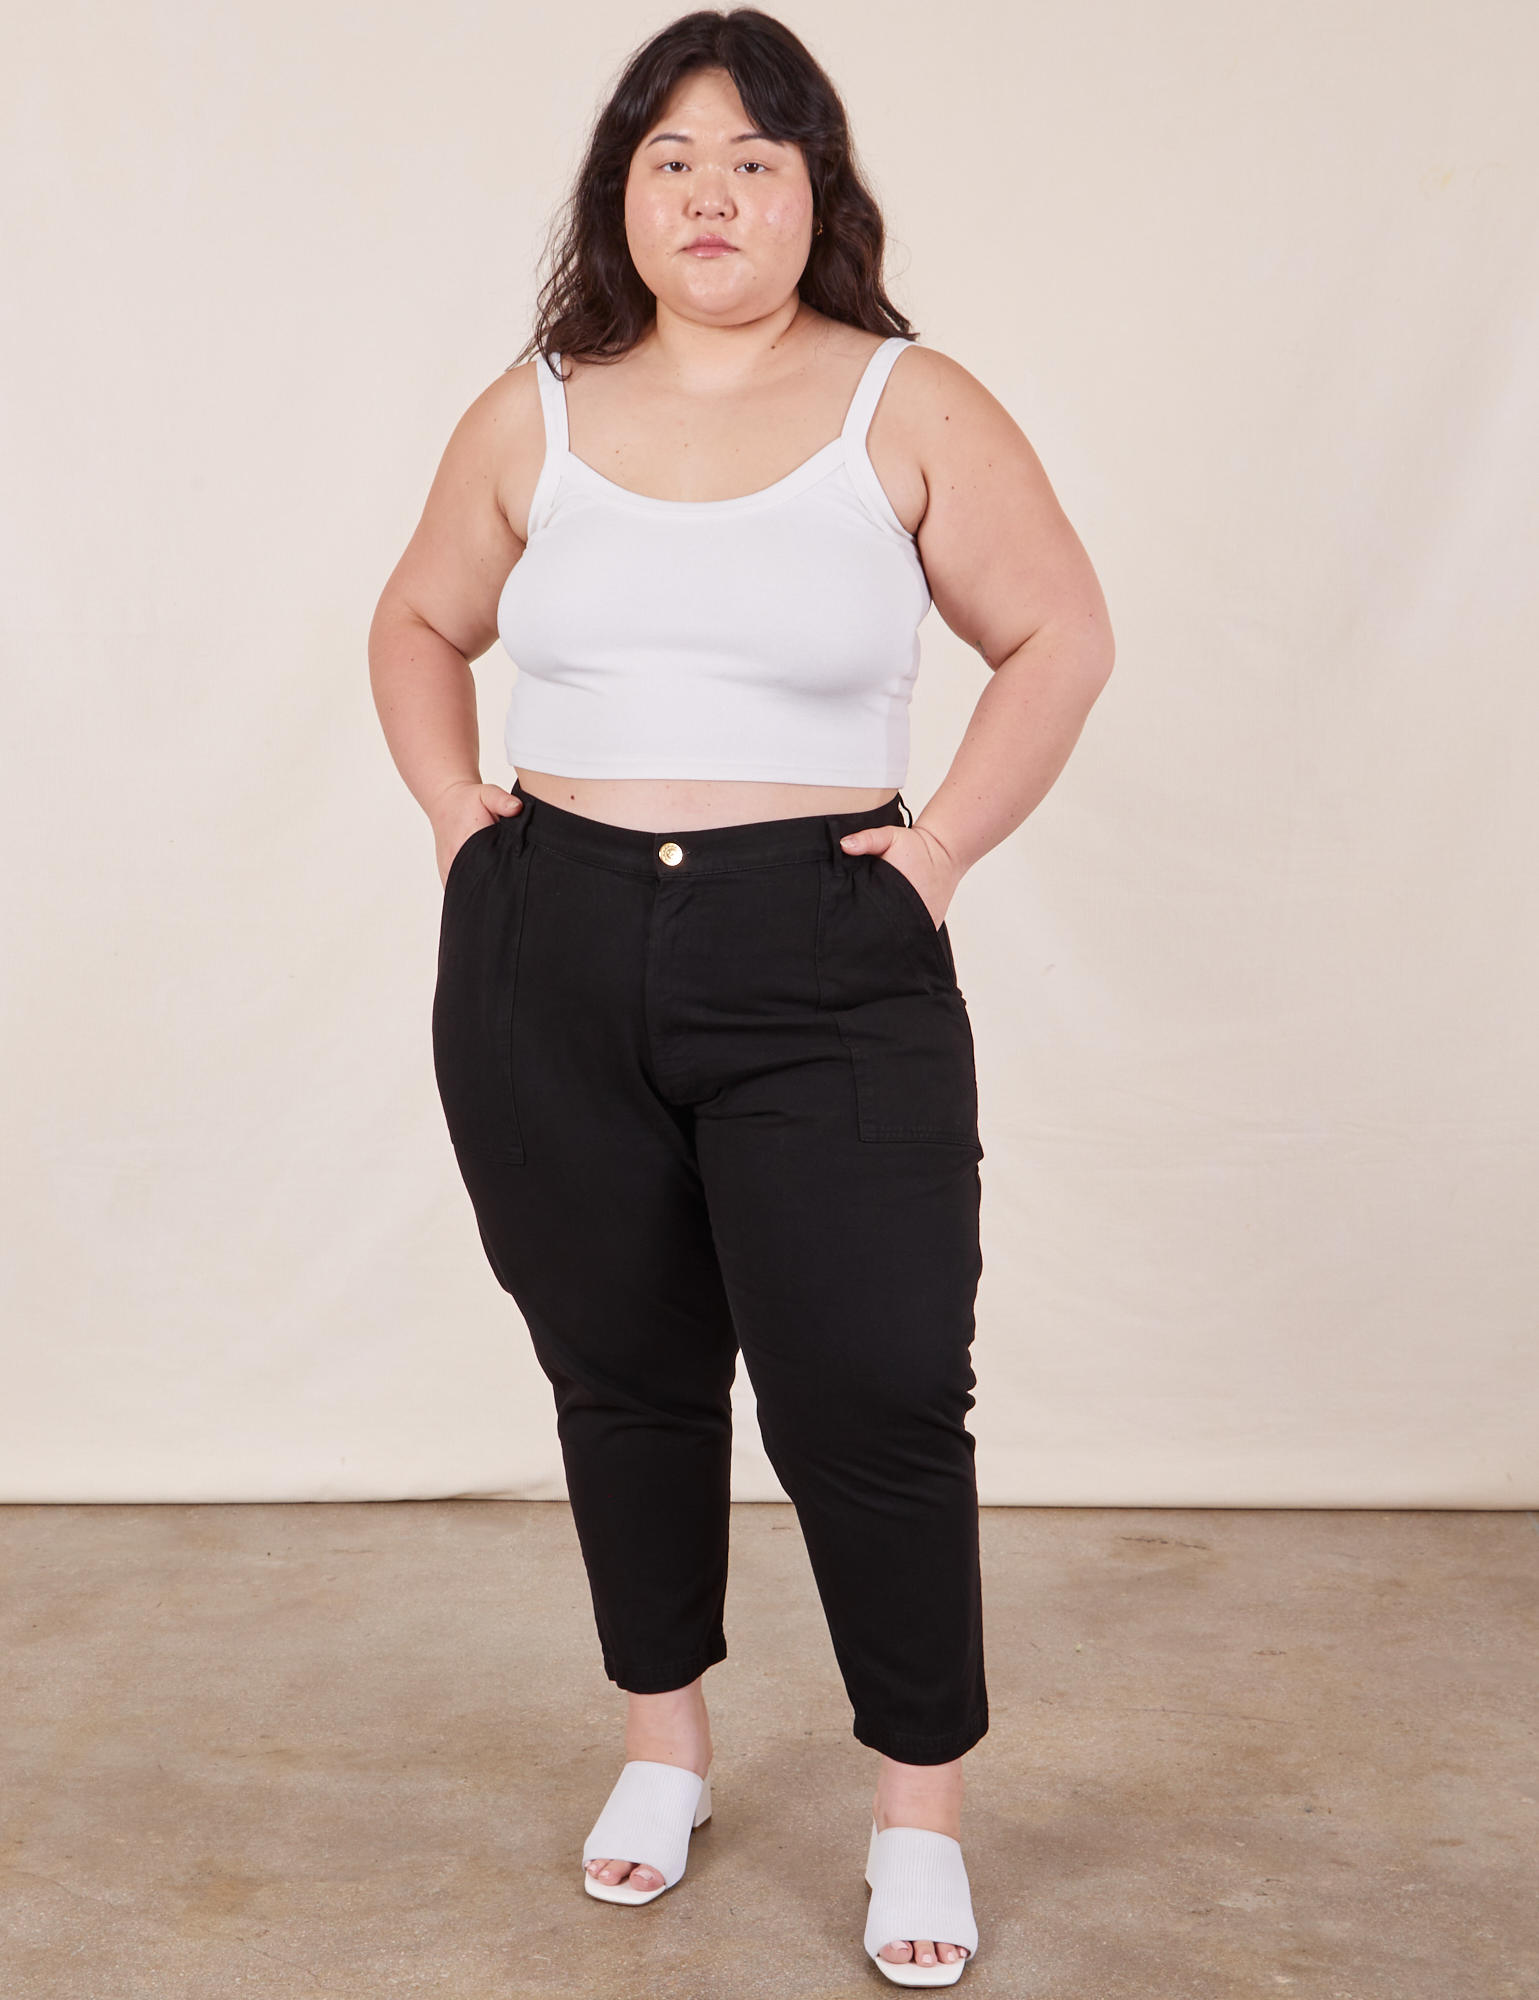 Ashley is 5&#39;7&quot; and wearing 1XL Petite Pencil Pants in Basic Black paired with vintage off-white Cropped Cami